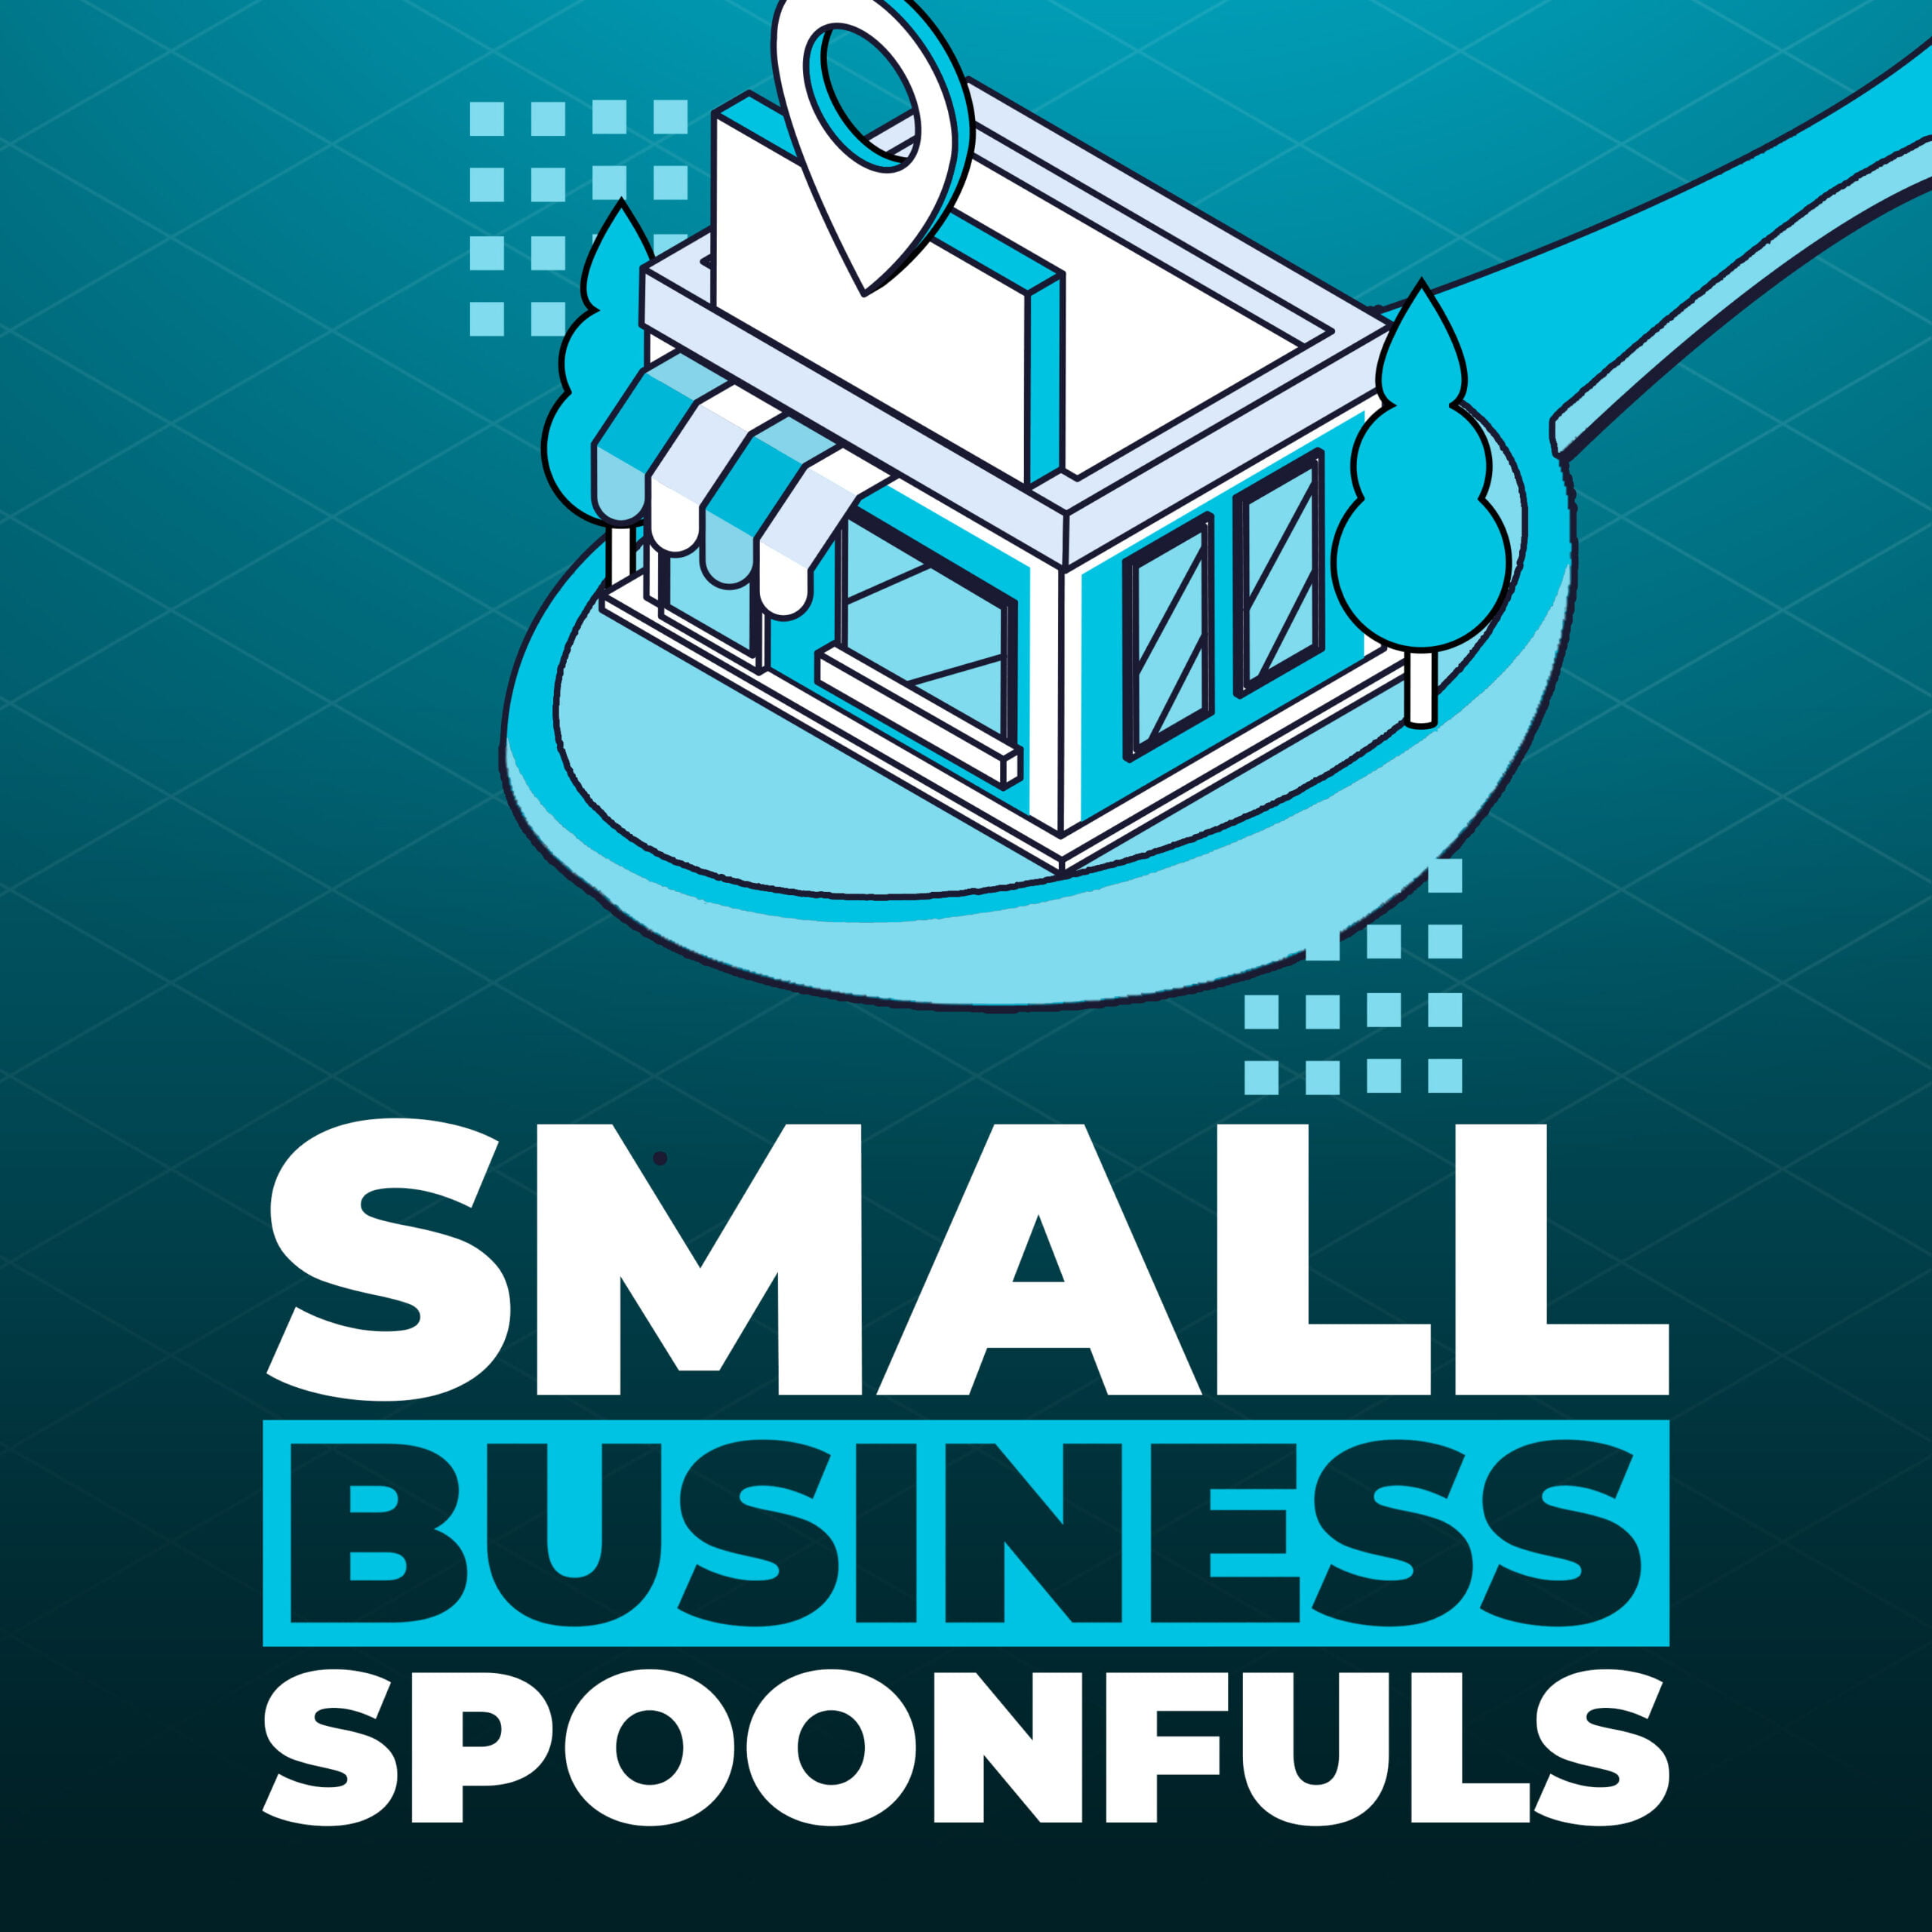 Small Business Spoonfuls